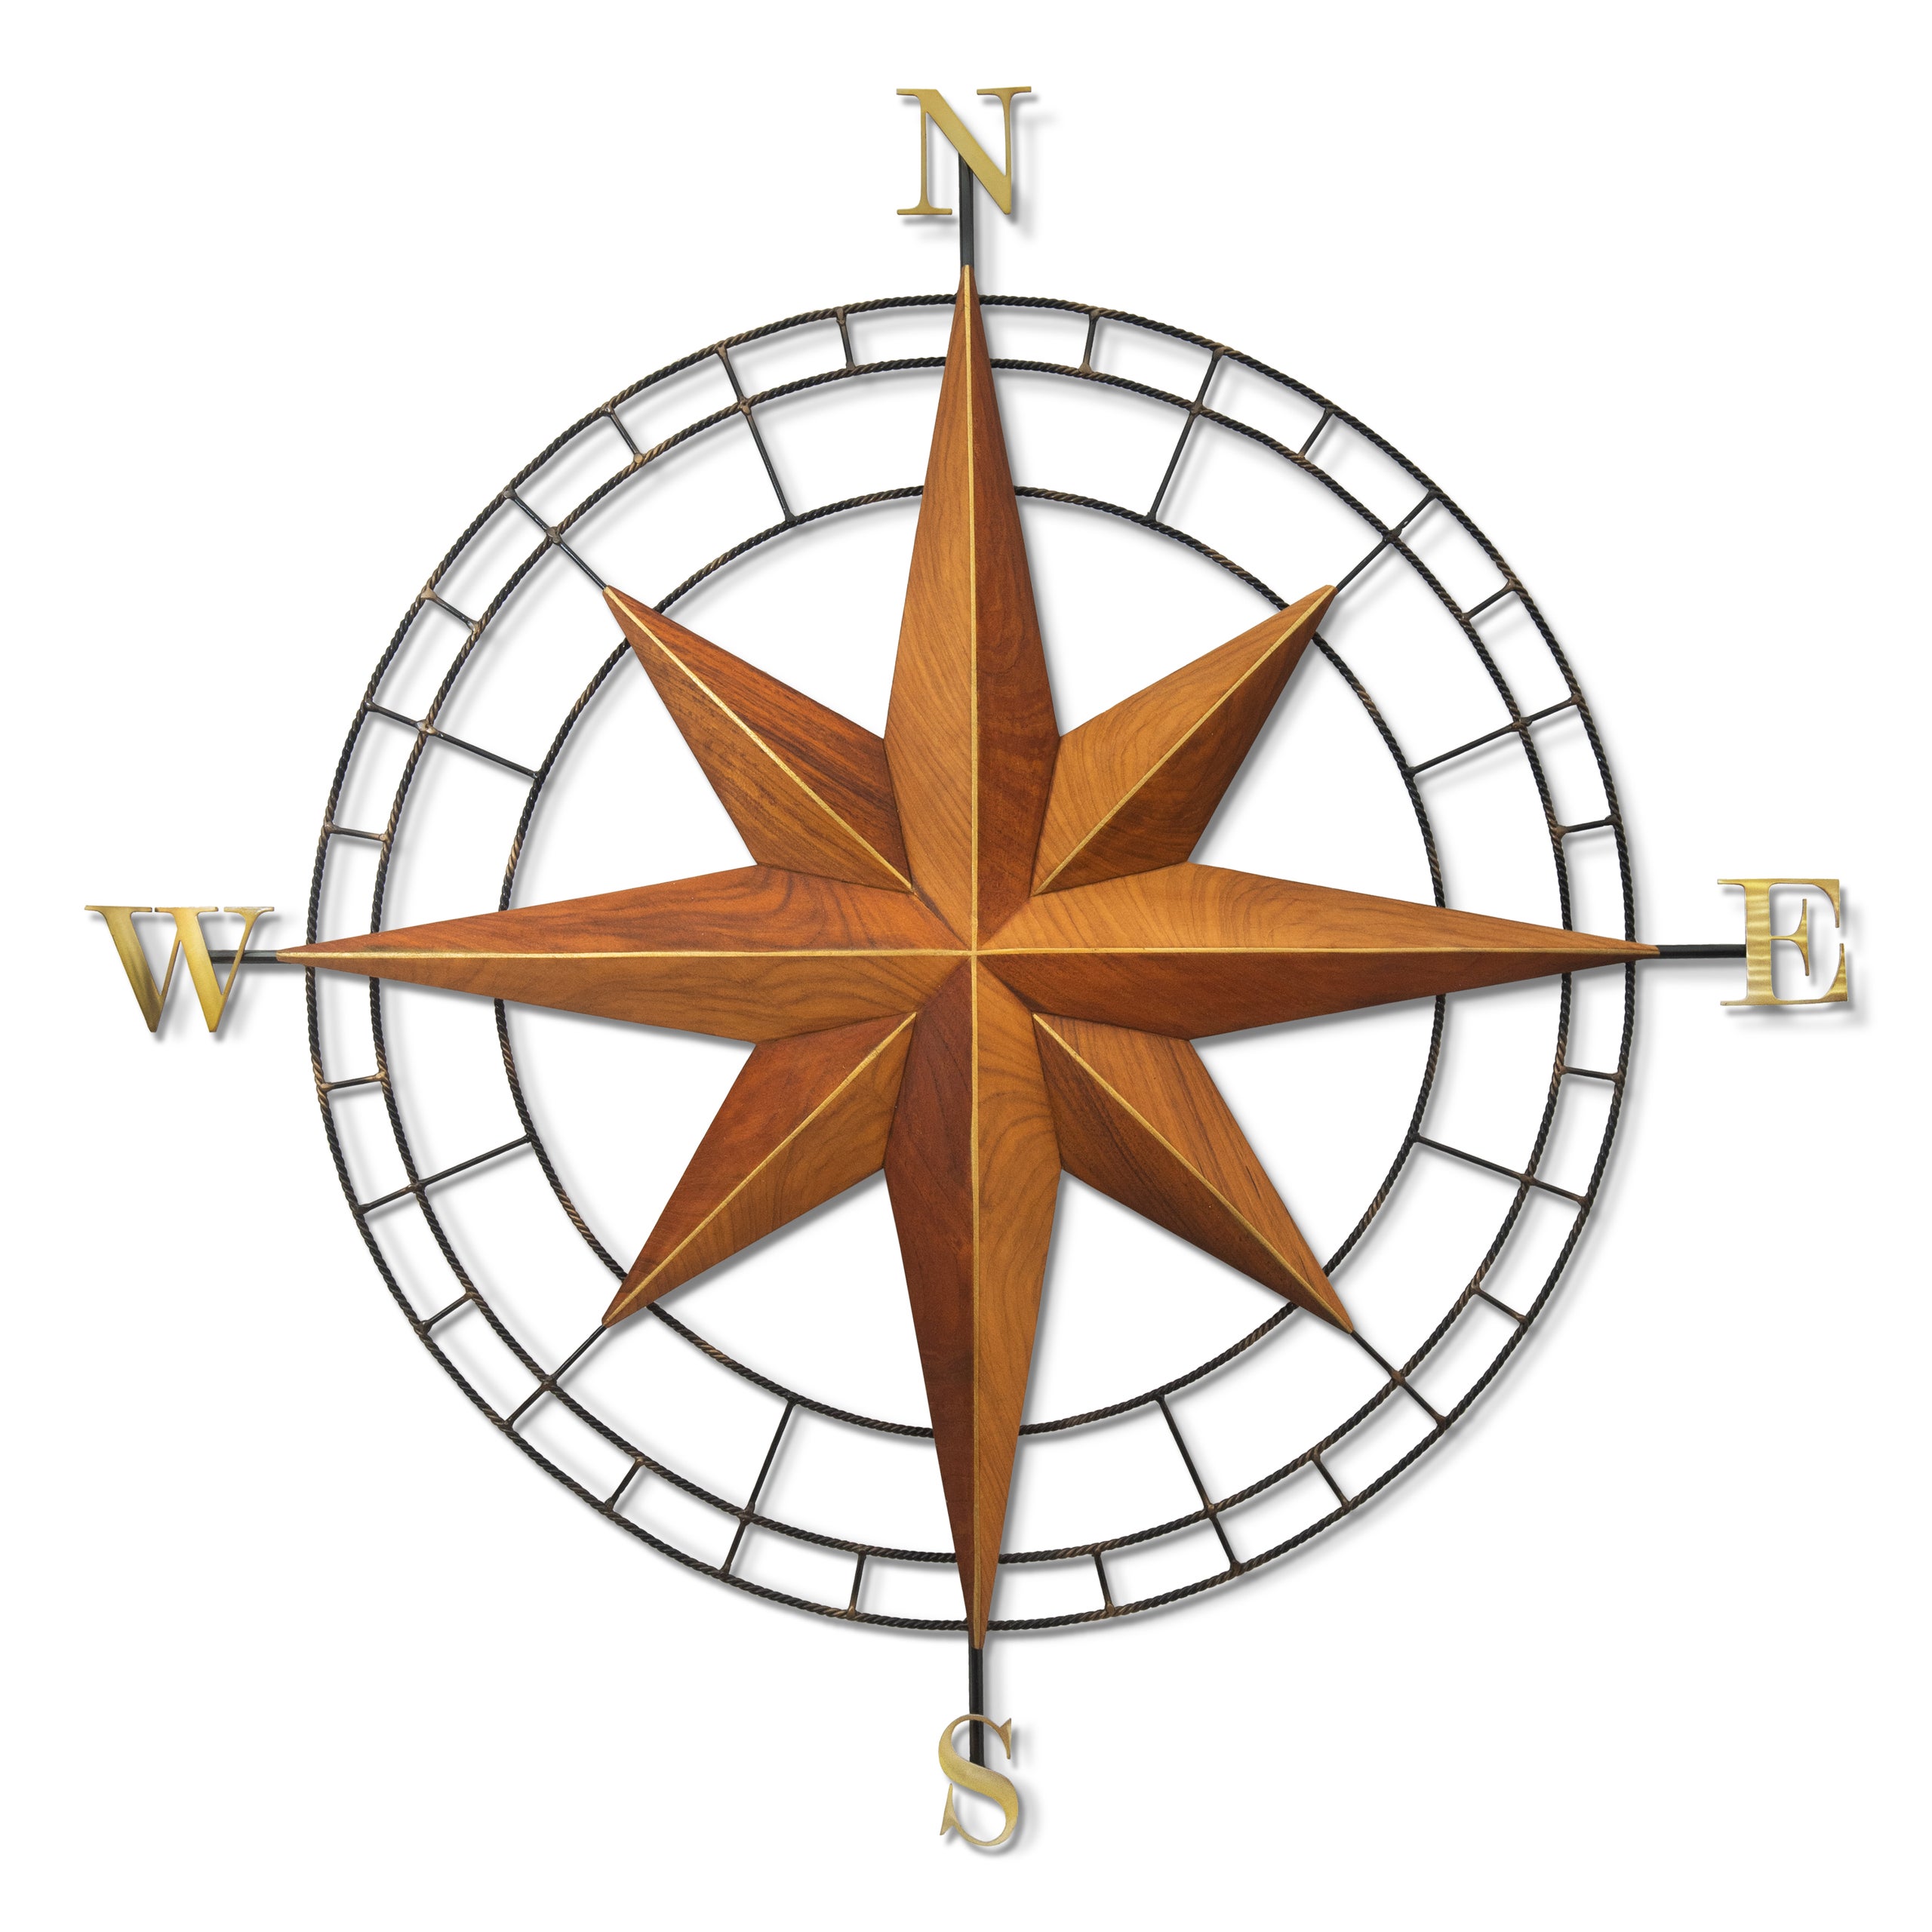 Compass Rose I (Teak and Stainless Steel)